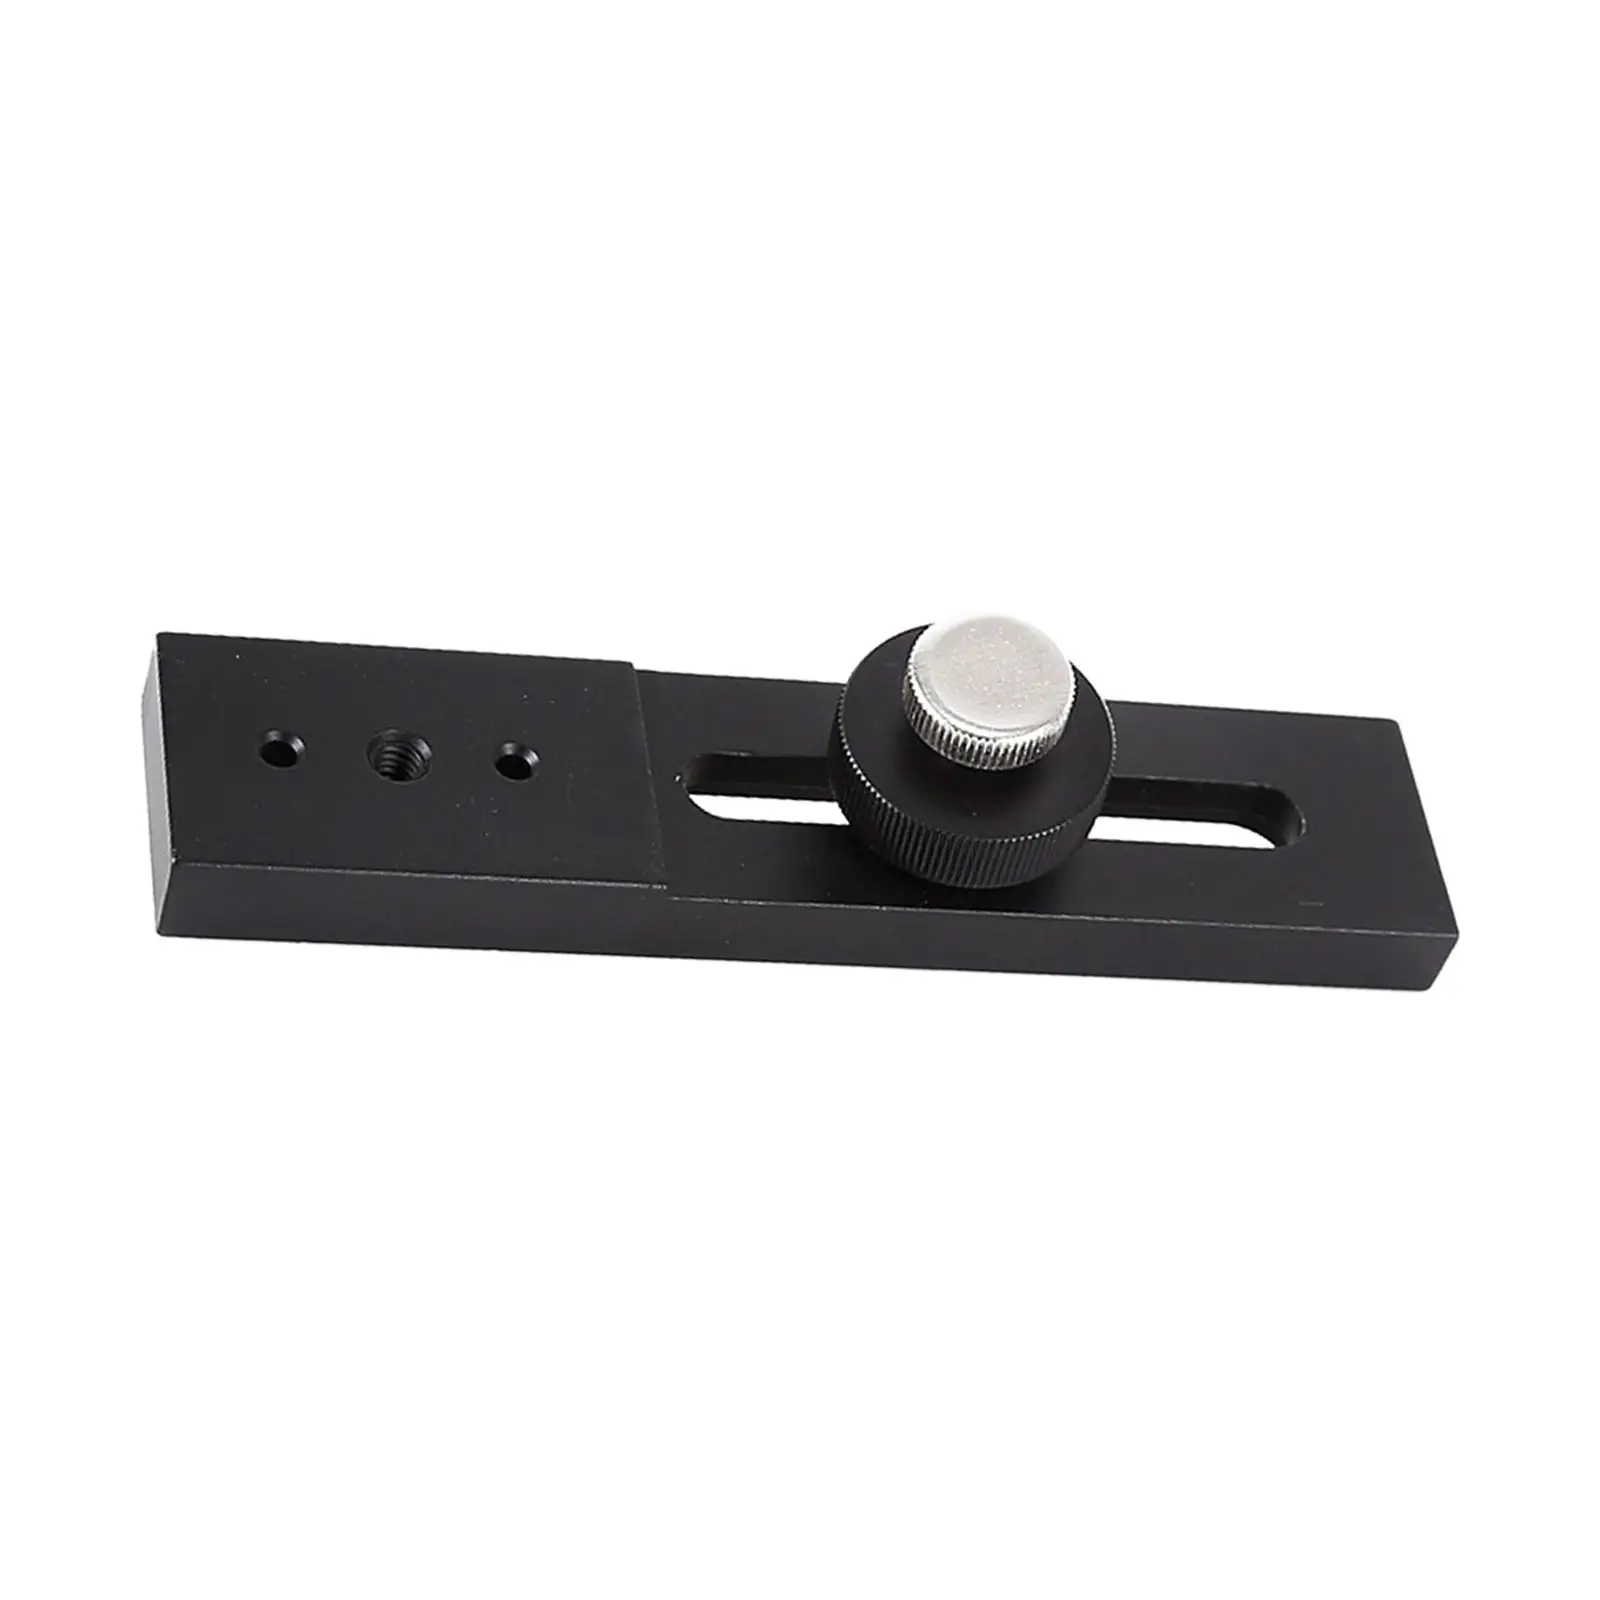 Dovetail Mount Plate Adapter Accessories for Astronomical Telescope Supplies